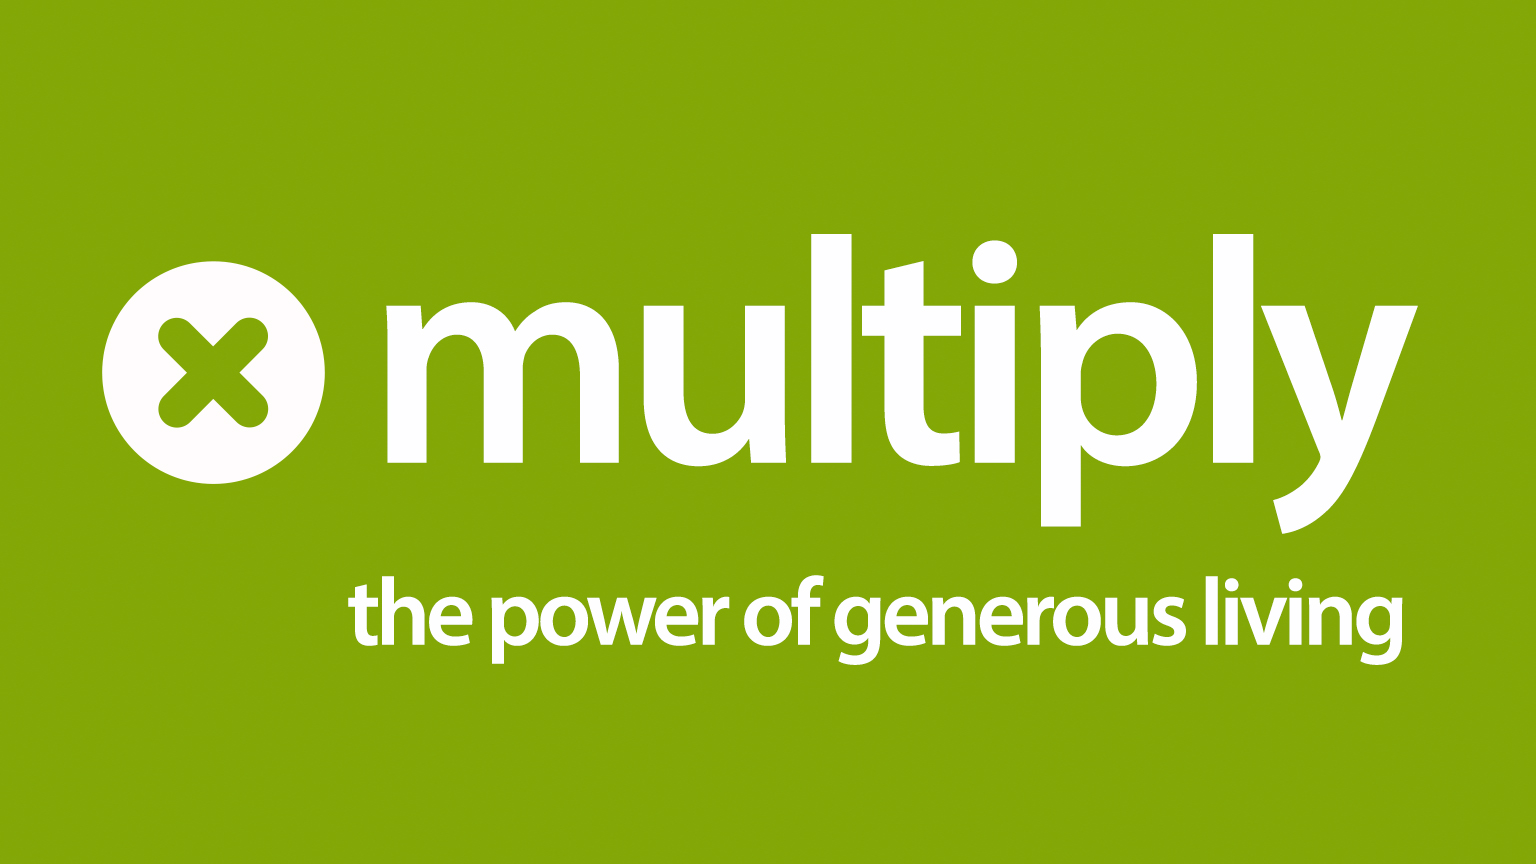 Multiply Part 2 - Multiplication begins with trust